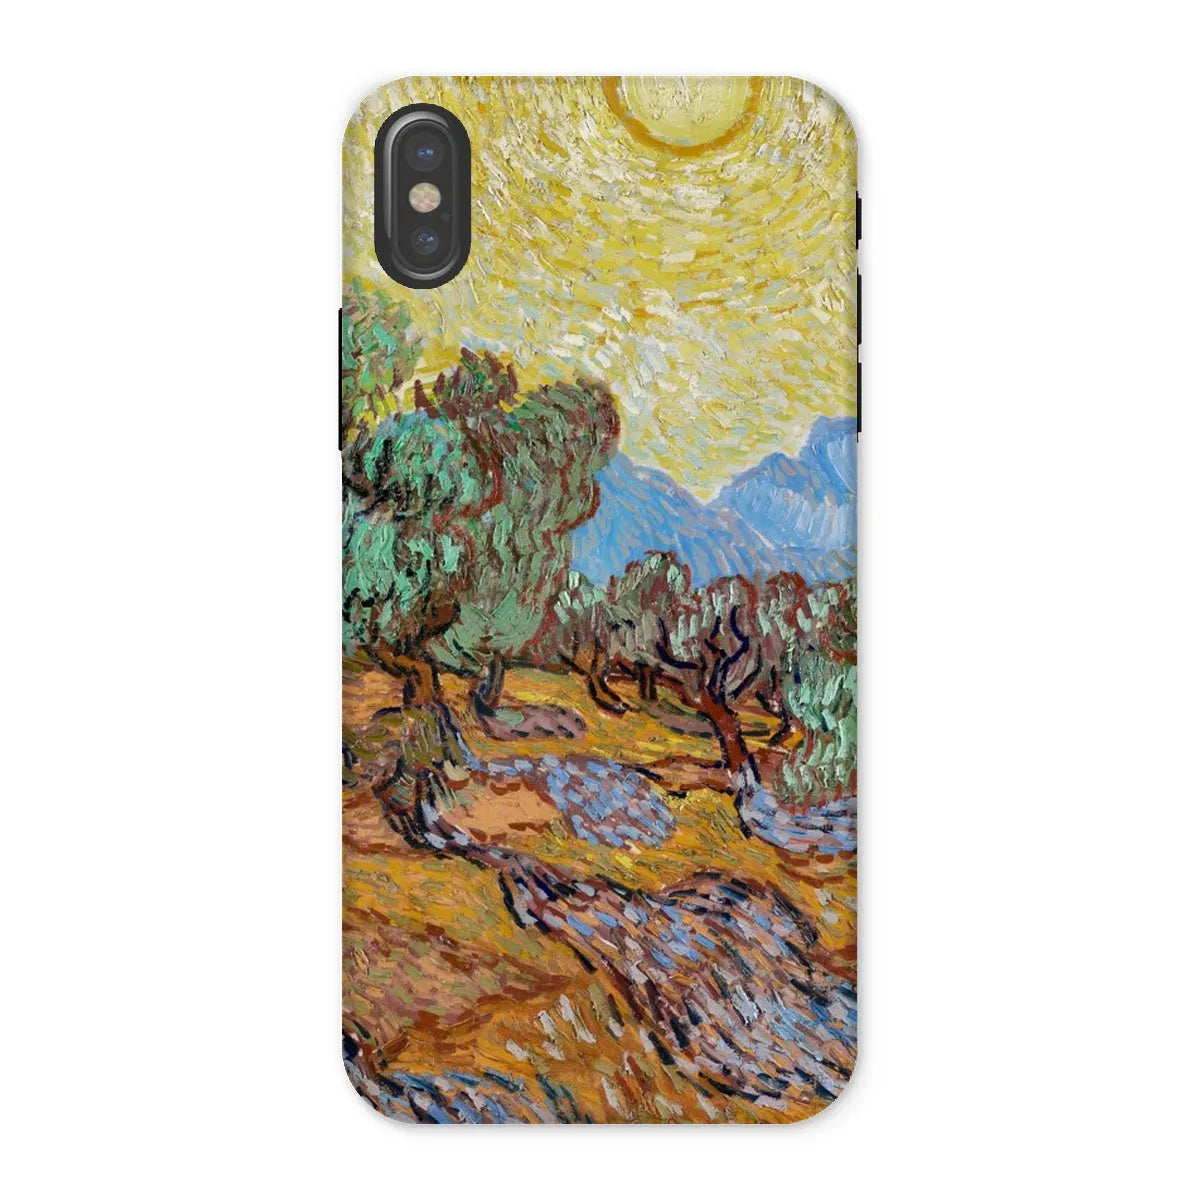 Olive Trees Too - Impressionist Phone Case - Vincent Van Gogh - Iphone x / Matte - Mobile Phone Cases - Aesthetic Art